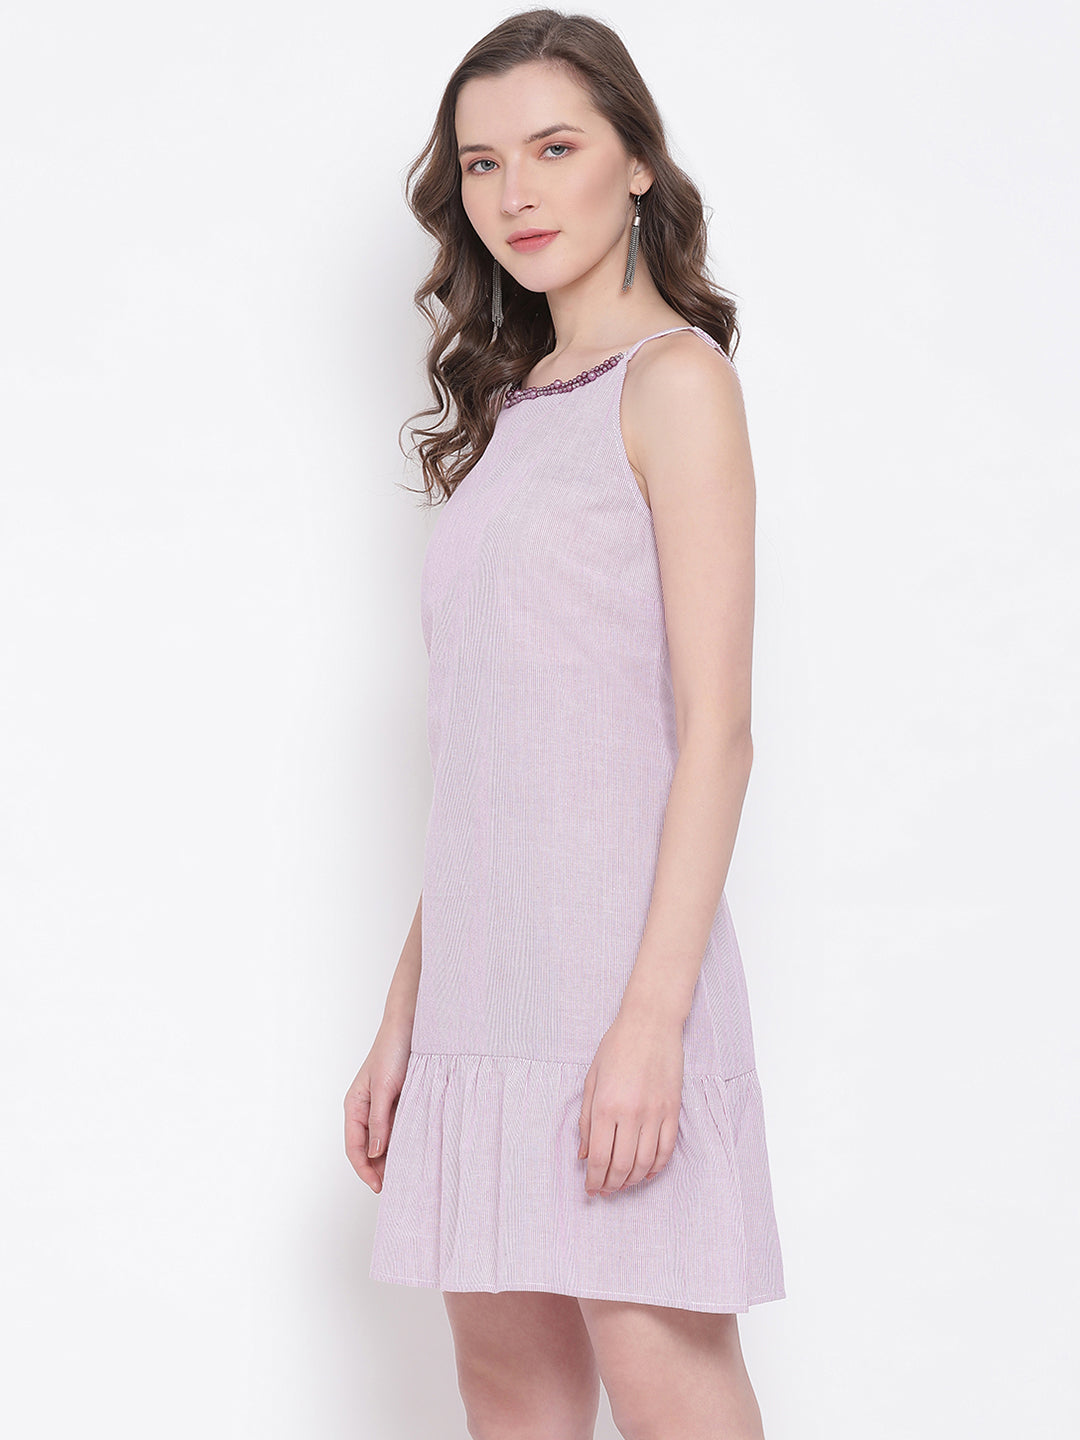 LY2 Cotton Purple Shoulder Straps Sleeveless A-Line Party Dress For Women